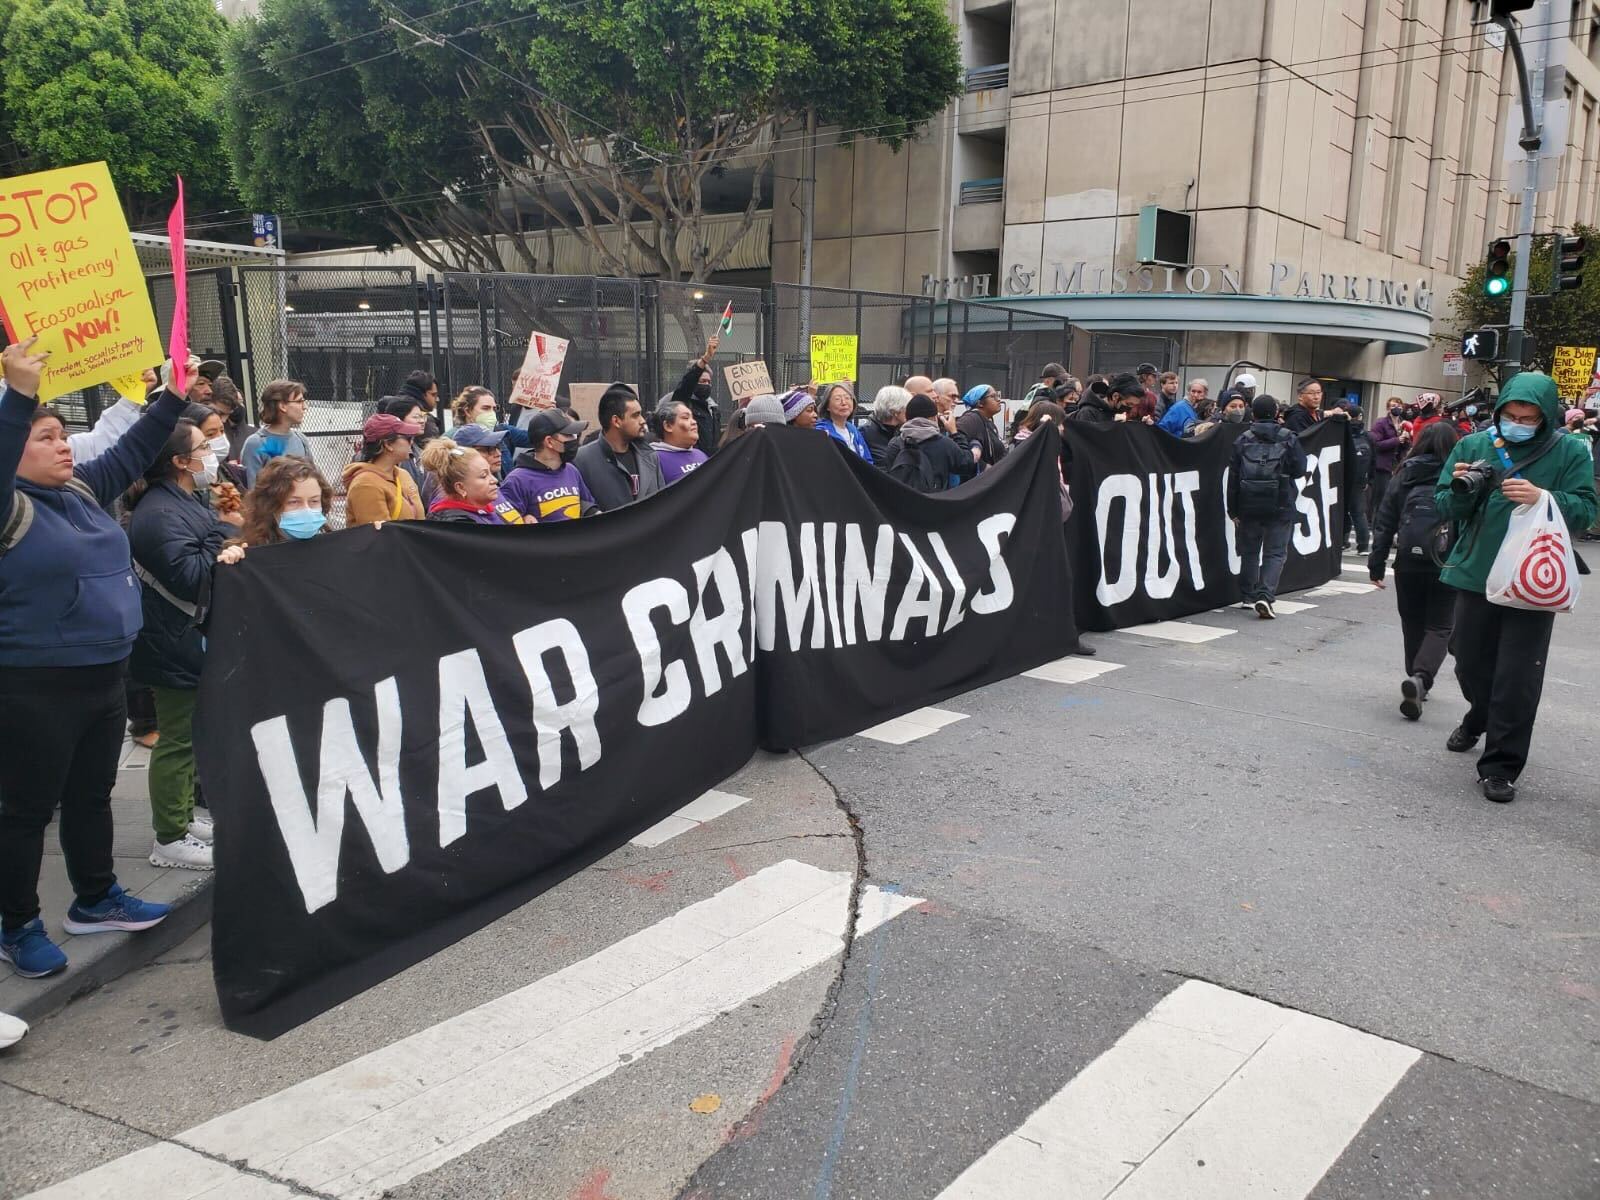 A row of protesters holds a black banner with words in white block lettering with the words &quot;War criminals out of SF&quot; in front of tall black security fencing blocking off a street intersection.